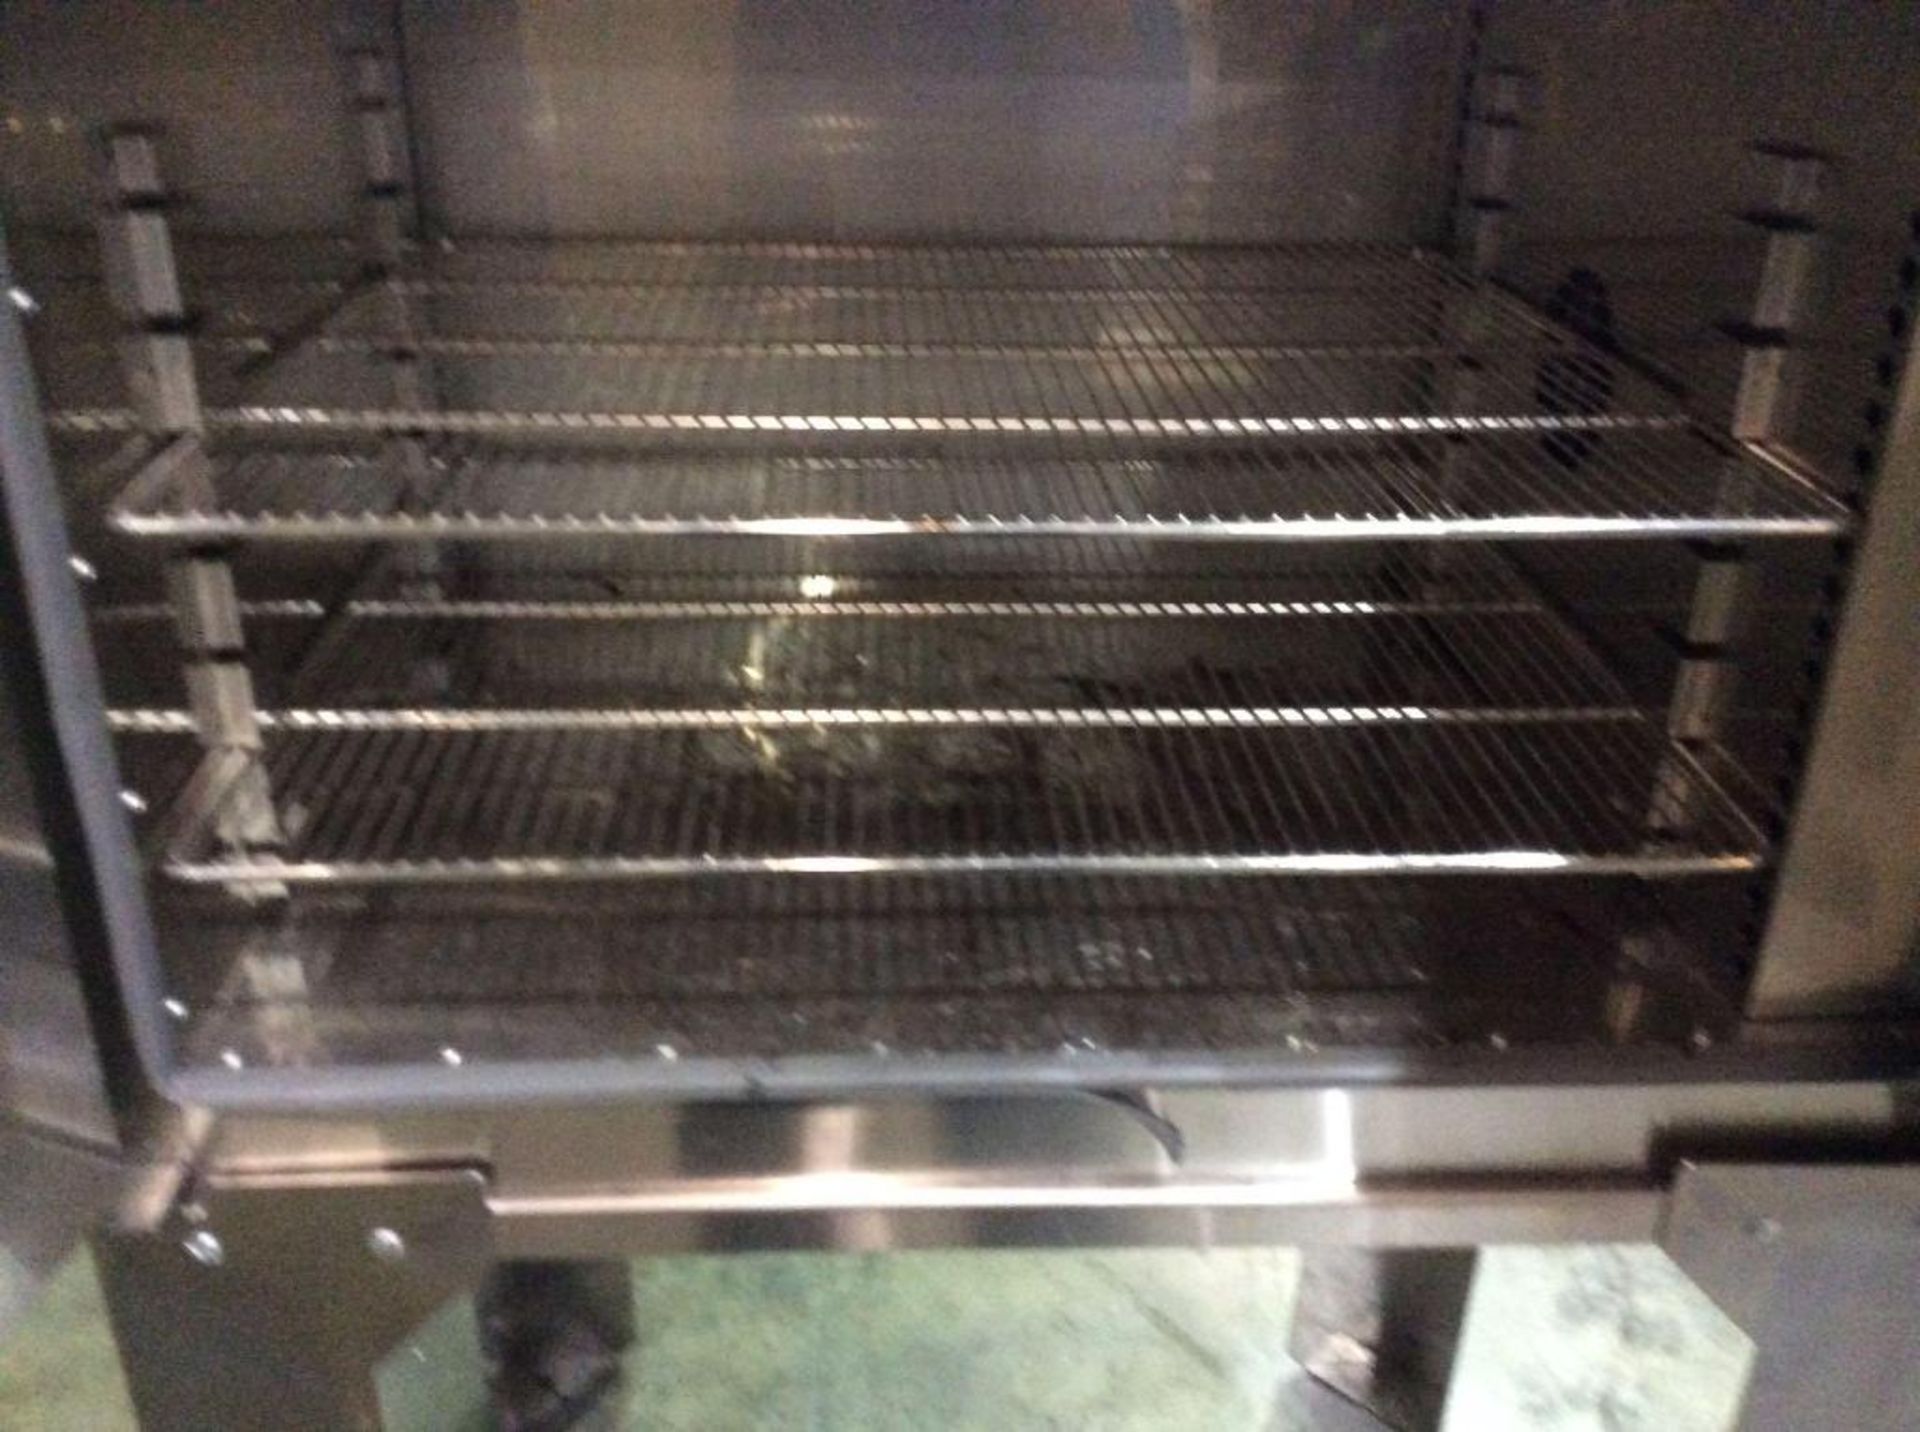 Grieve stainless steel industrial oven, mn NB-350, 2000 watts, 115 volts, 1 phase 28" x 18" x 24" - Image 4 of 4